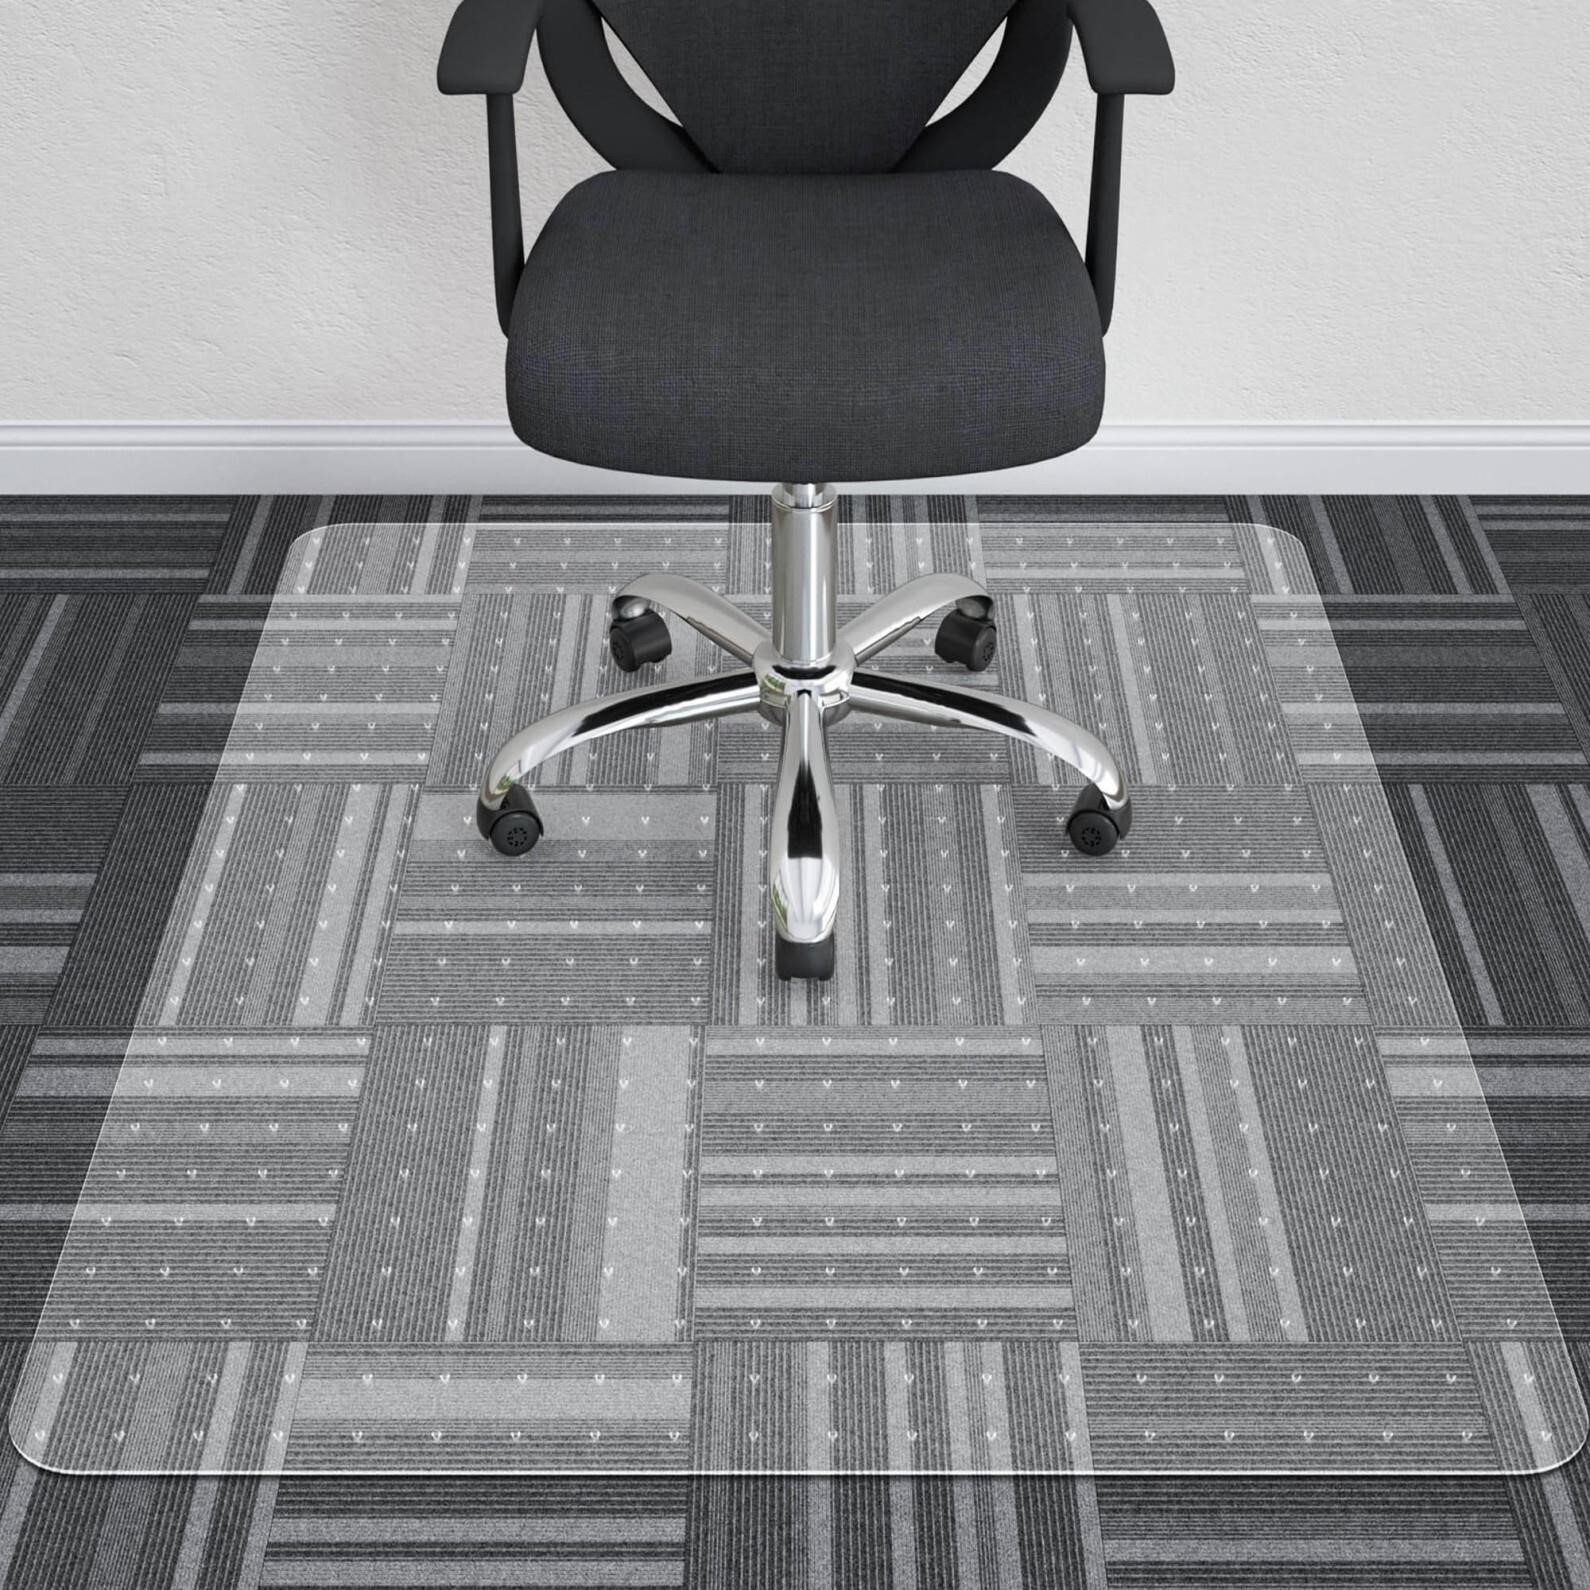 HOMEK Office Chair Mat for Low Pile Carpeted Floor